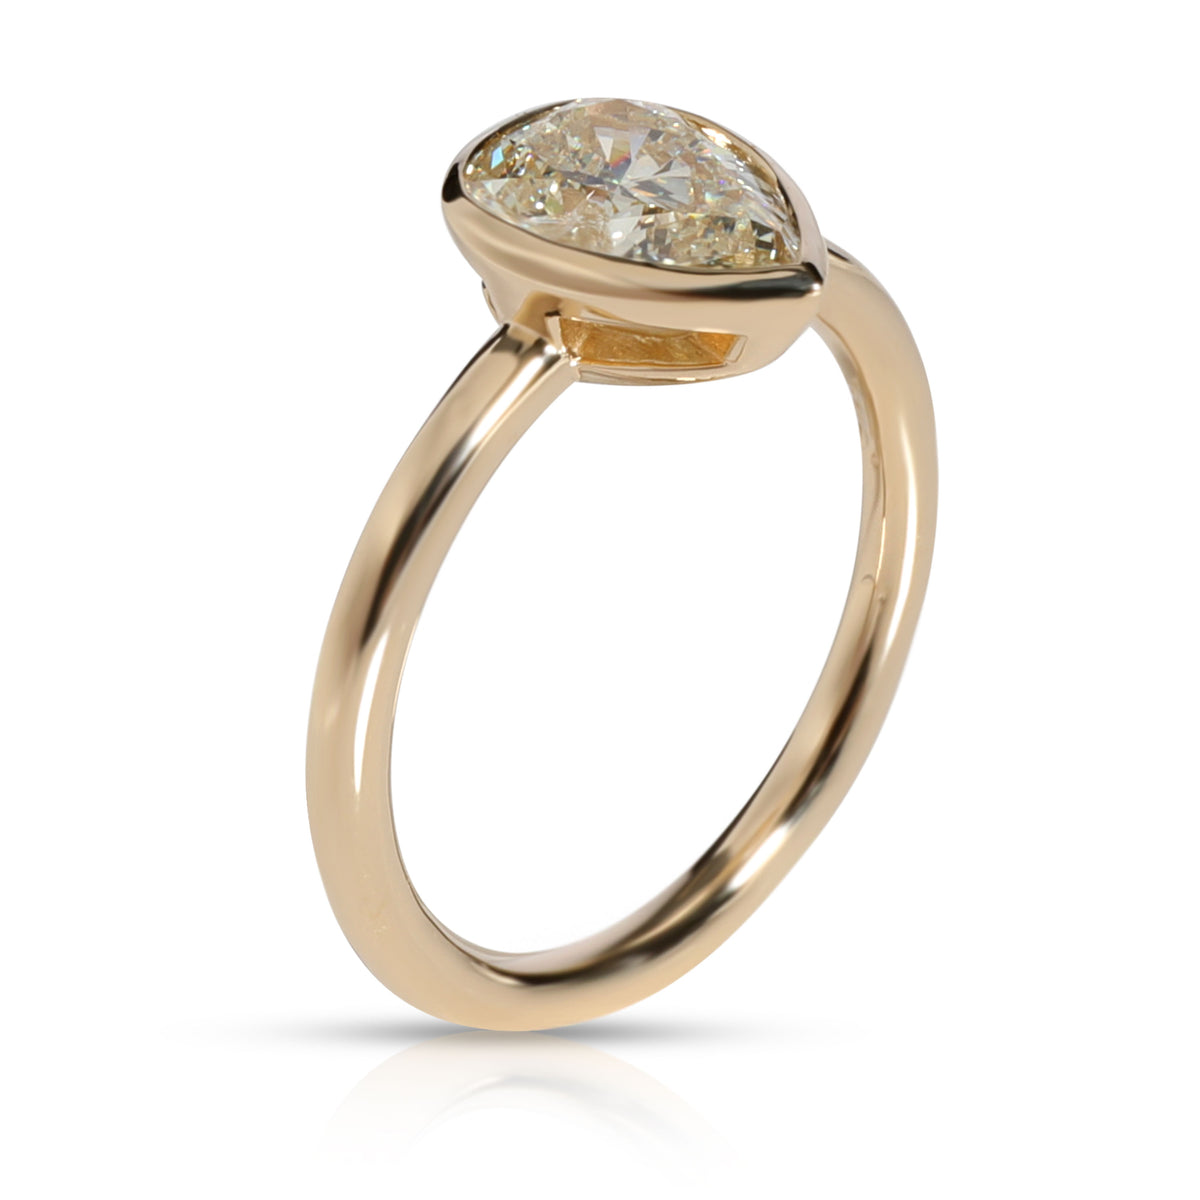 GIA Certified Bezel Set Diamond Solitaire Ring in 14K Yellow Gold L I2 1.52 CTW